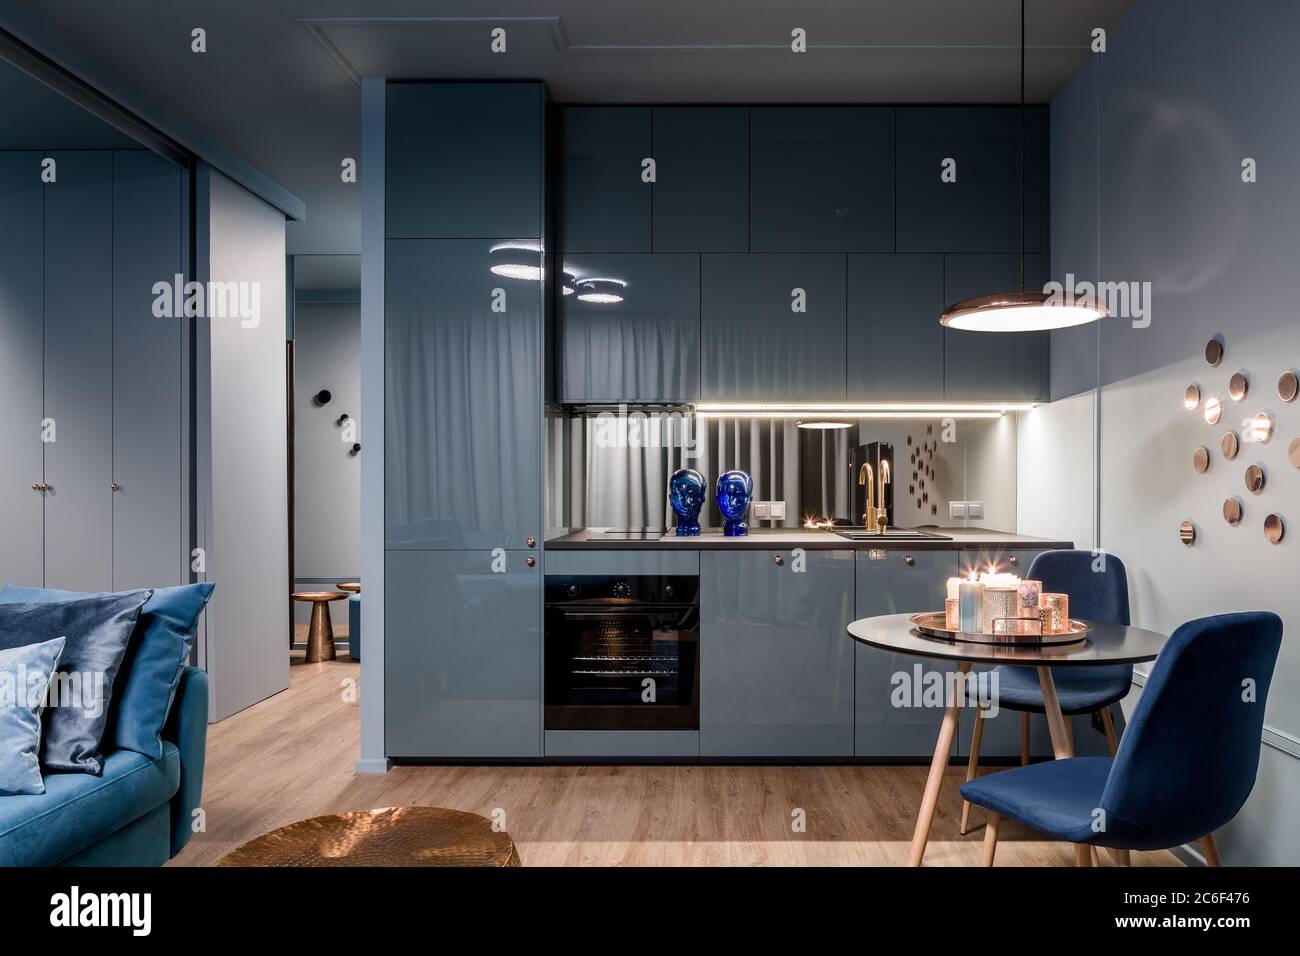 Dark home interior in blue with open kitchen and dining area with round table Stock Photo